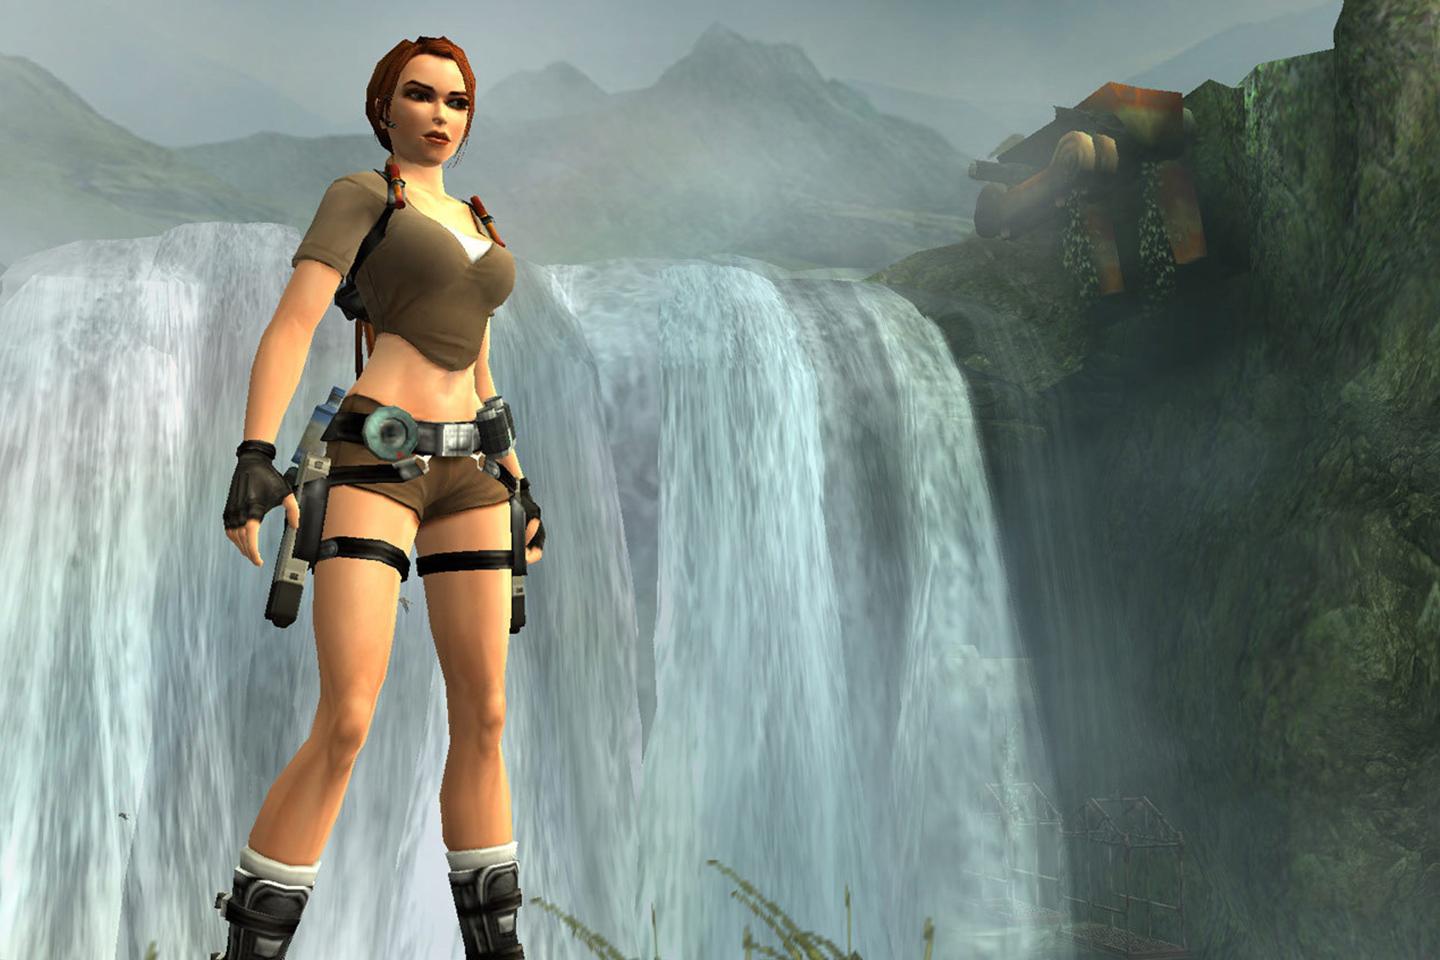 Lara standing in front of waterfall facing the camera.